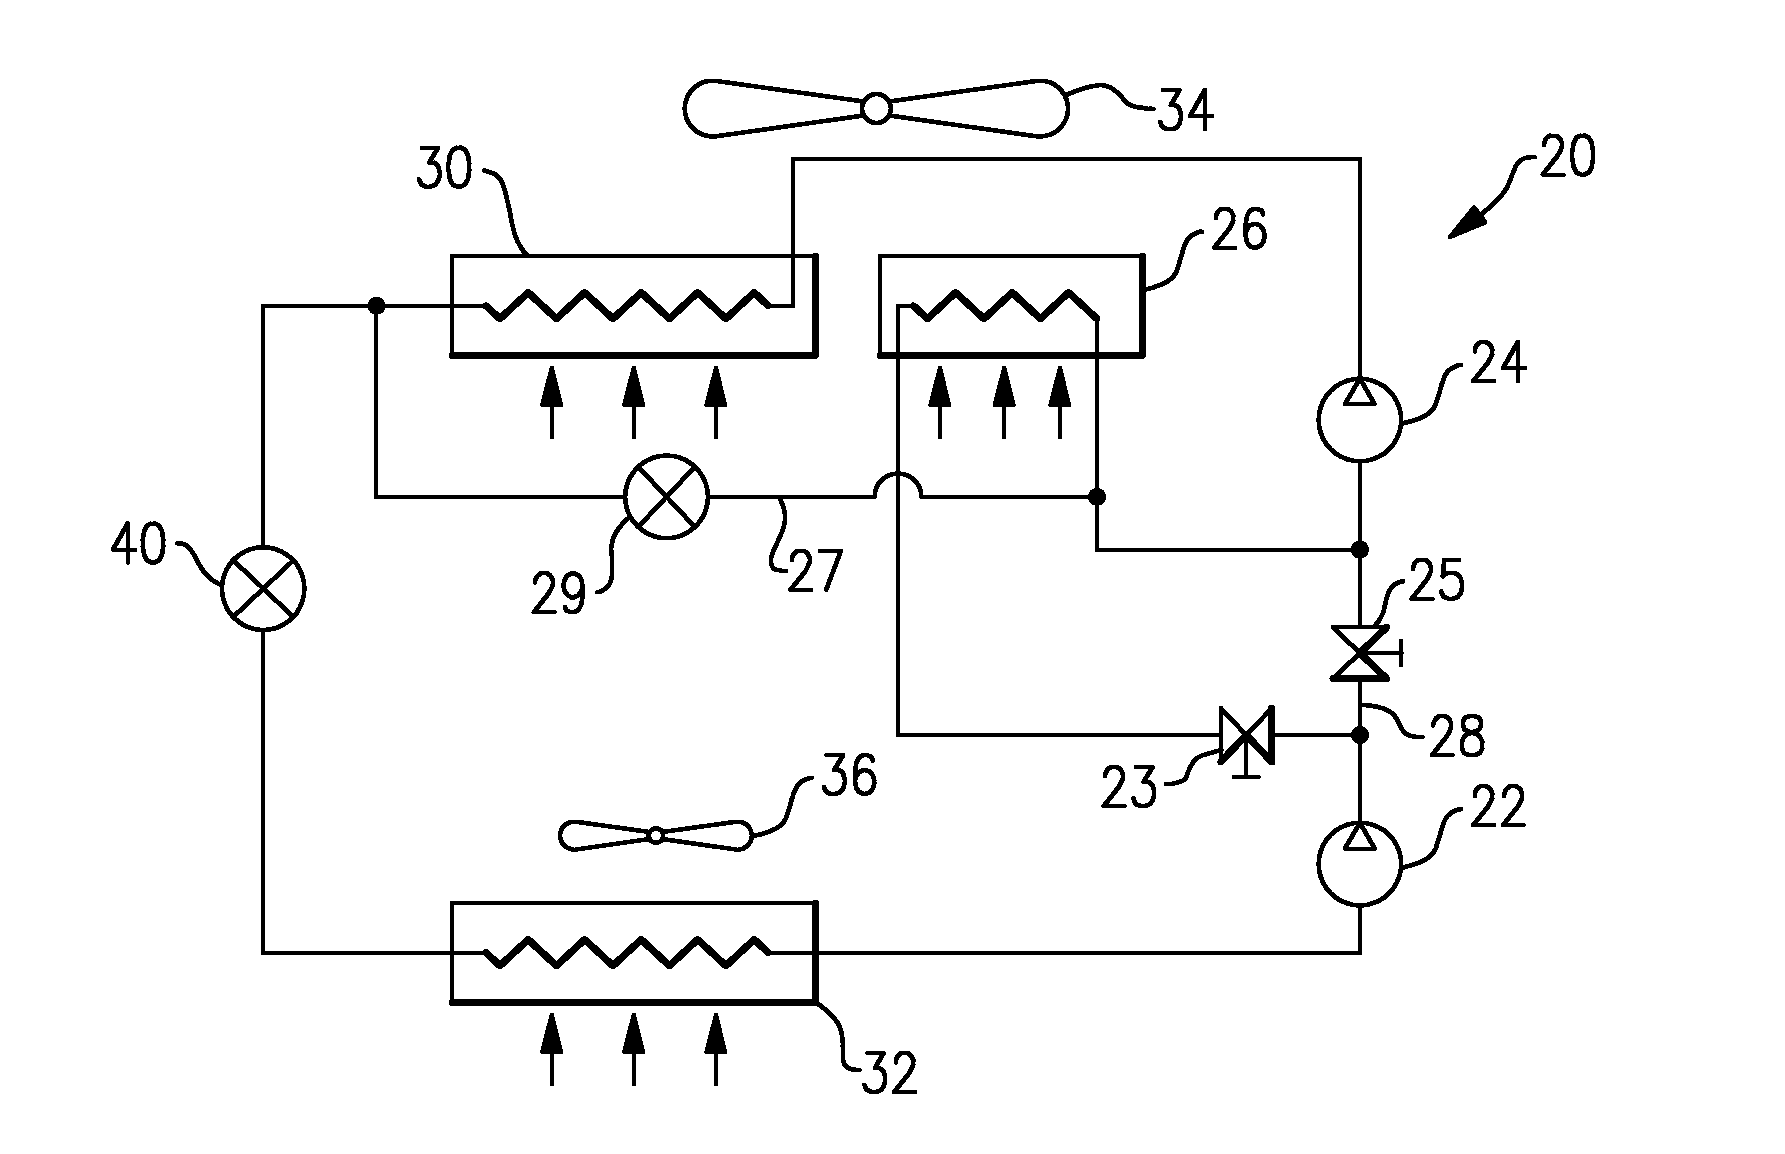 Refrigerant system with intercooler and liquid/vapor injection